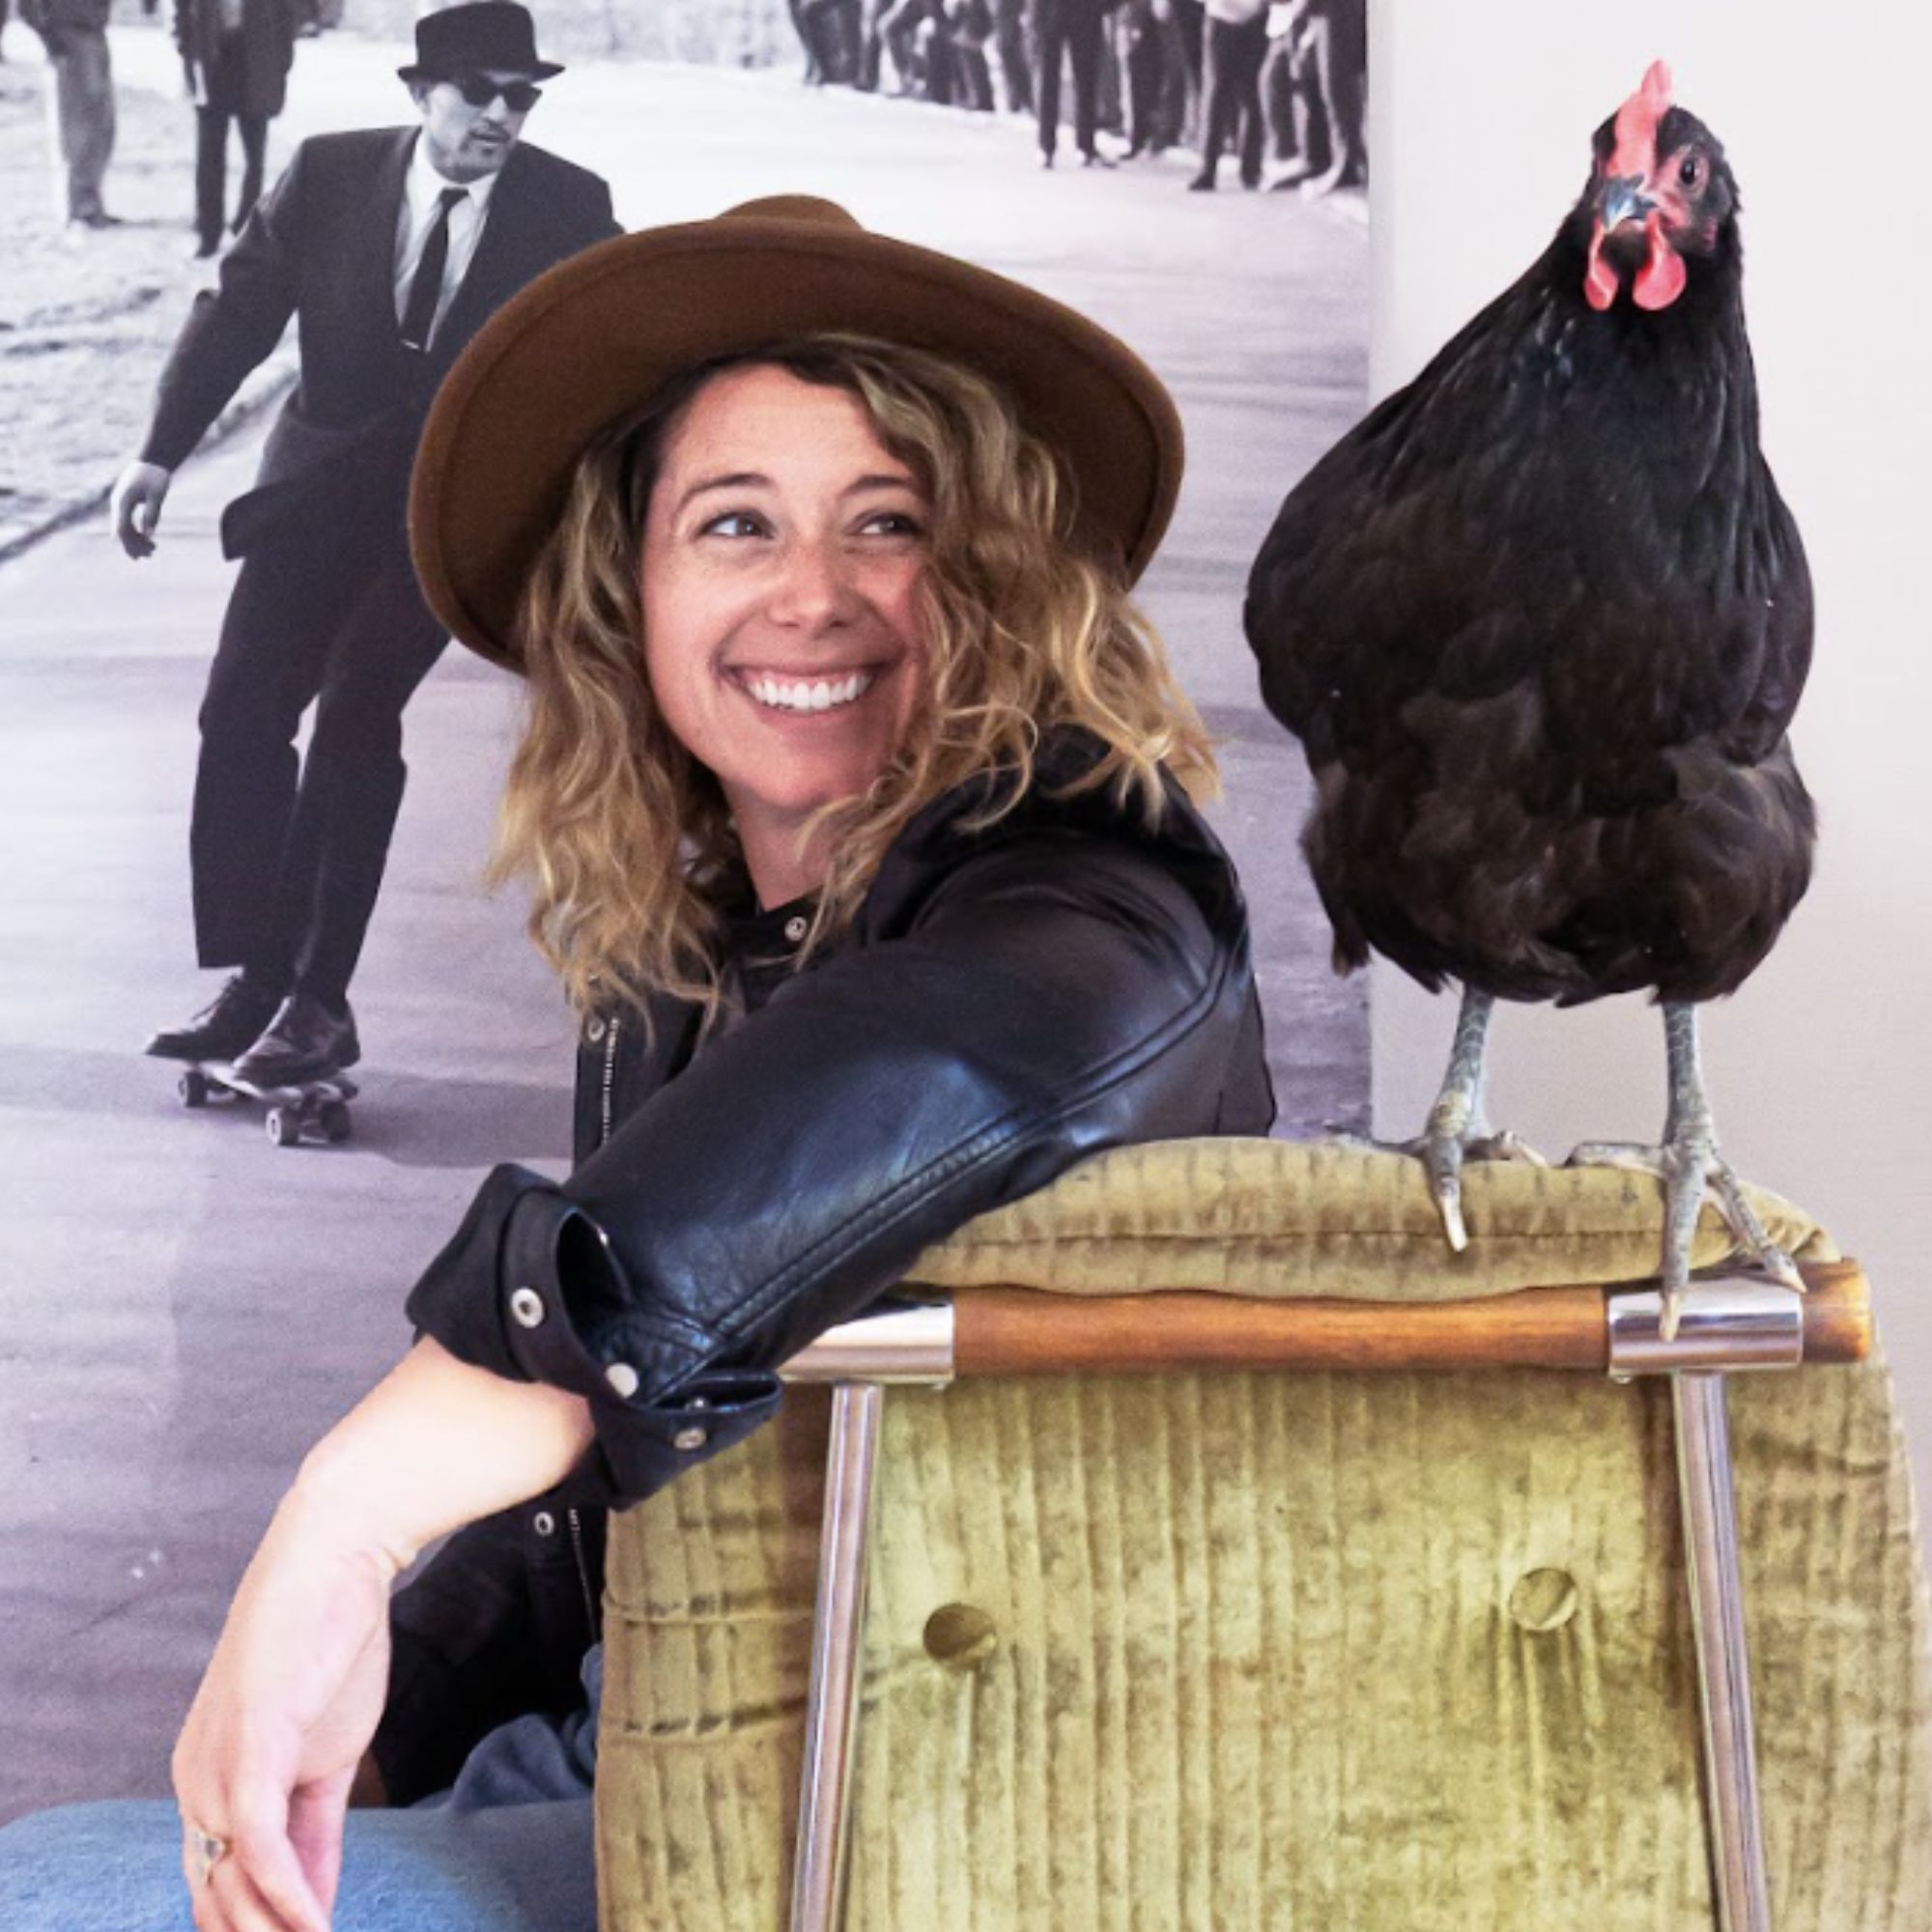 A picture of Lisa Carolla, a woman wearing a brown hat wearing a leather jacket, smiling to the right at a black chicken standing on a woven box, with a black and white print of a man behind her